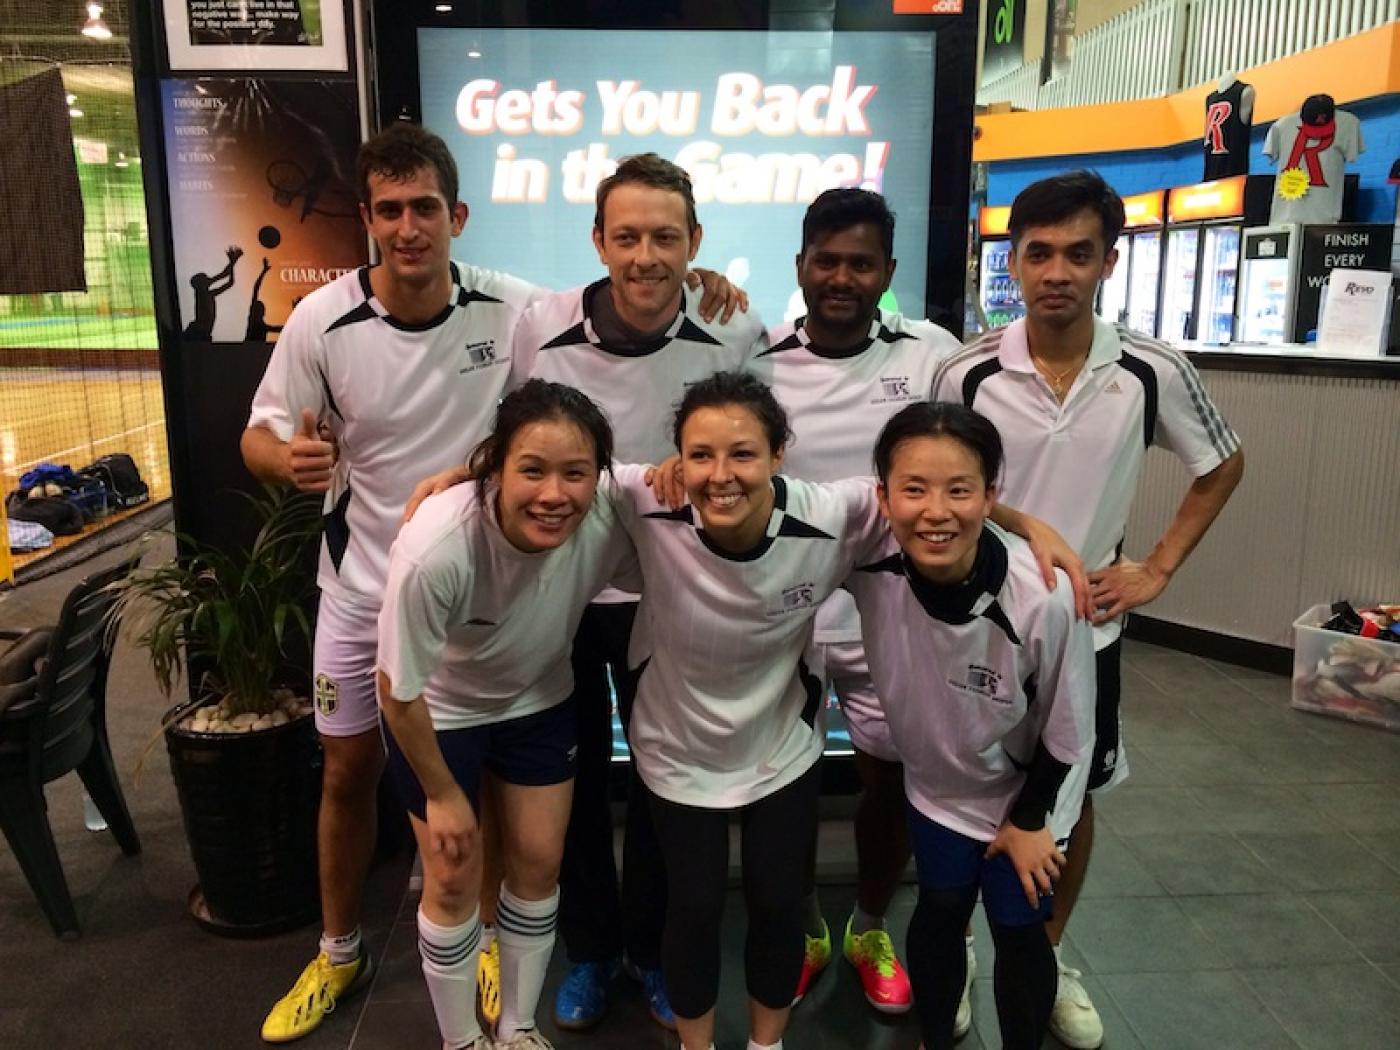 Gillian (front, centre) poses with her soccer team in Perth.